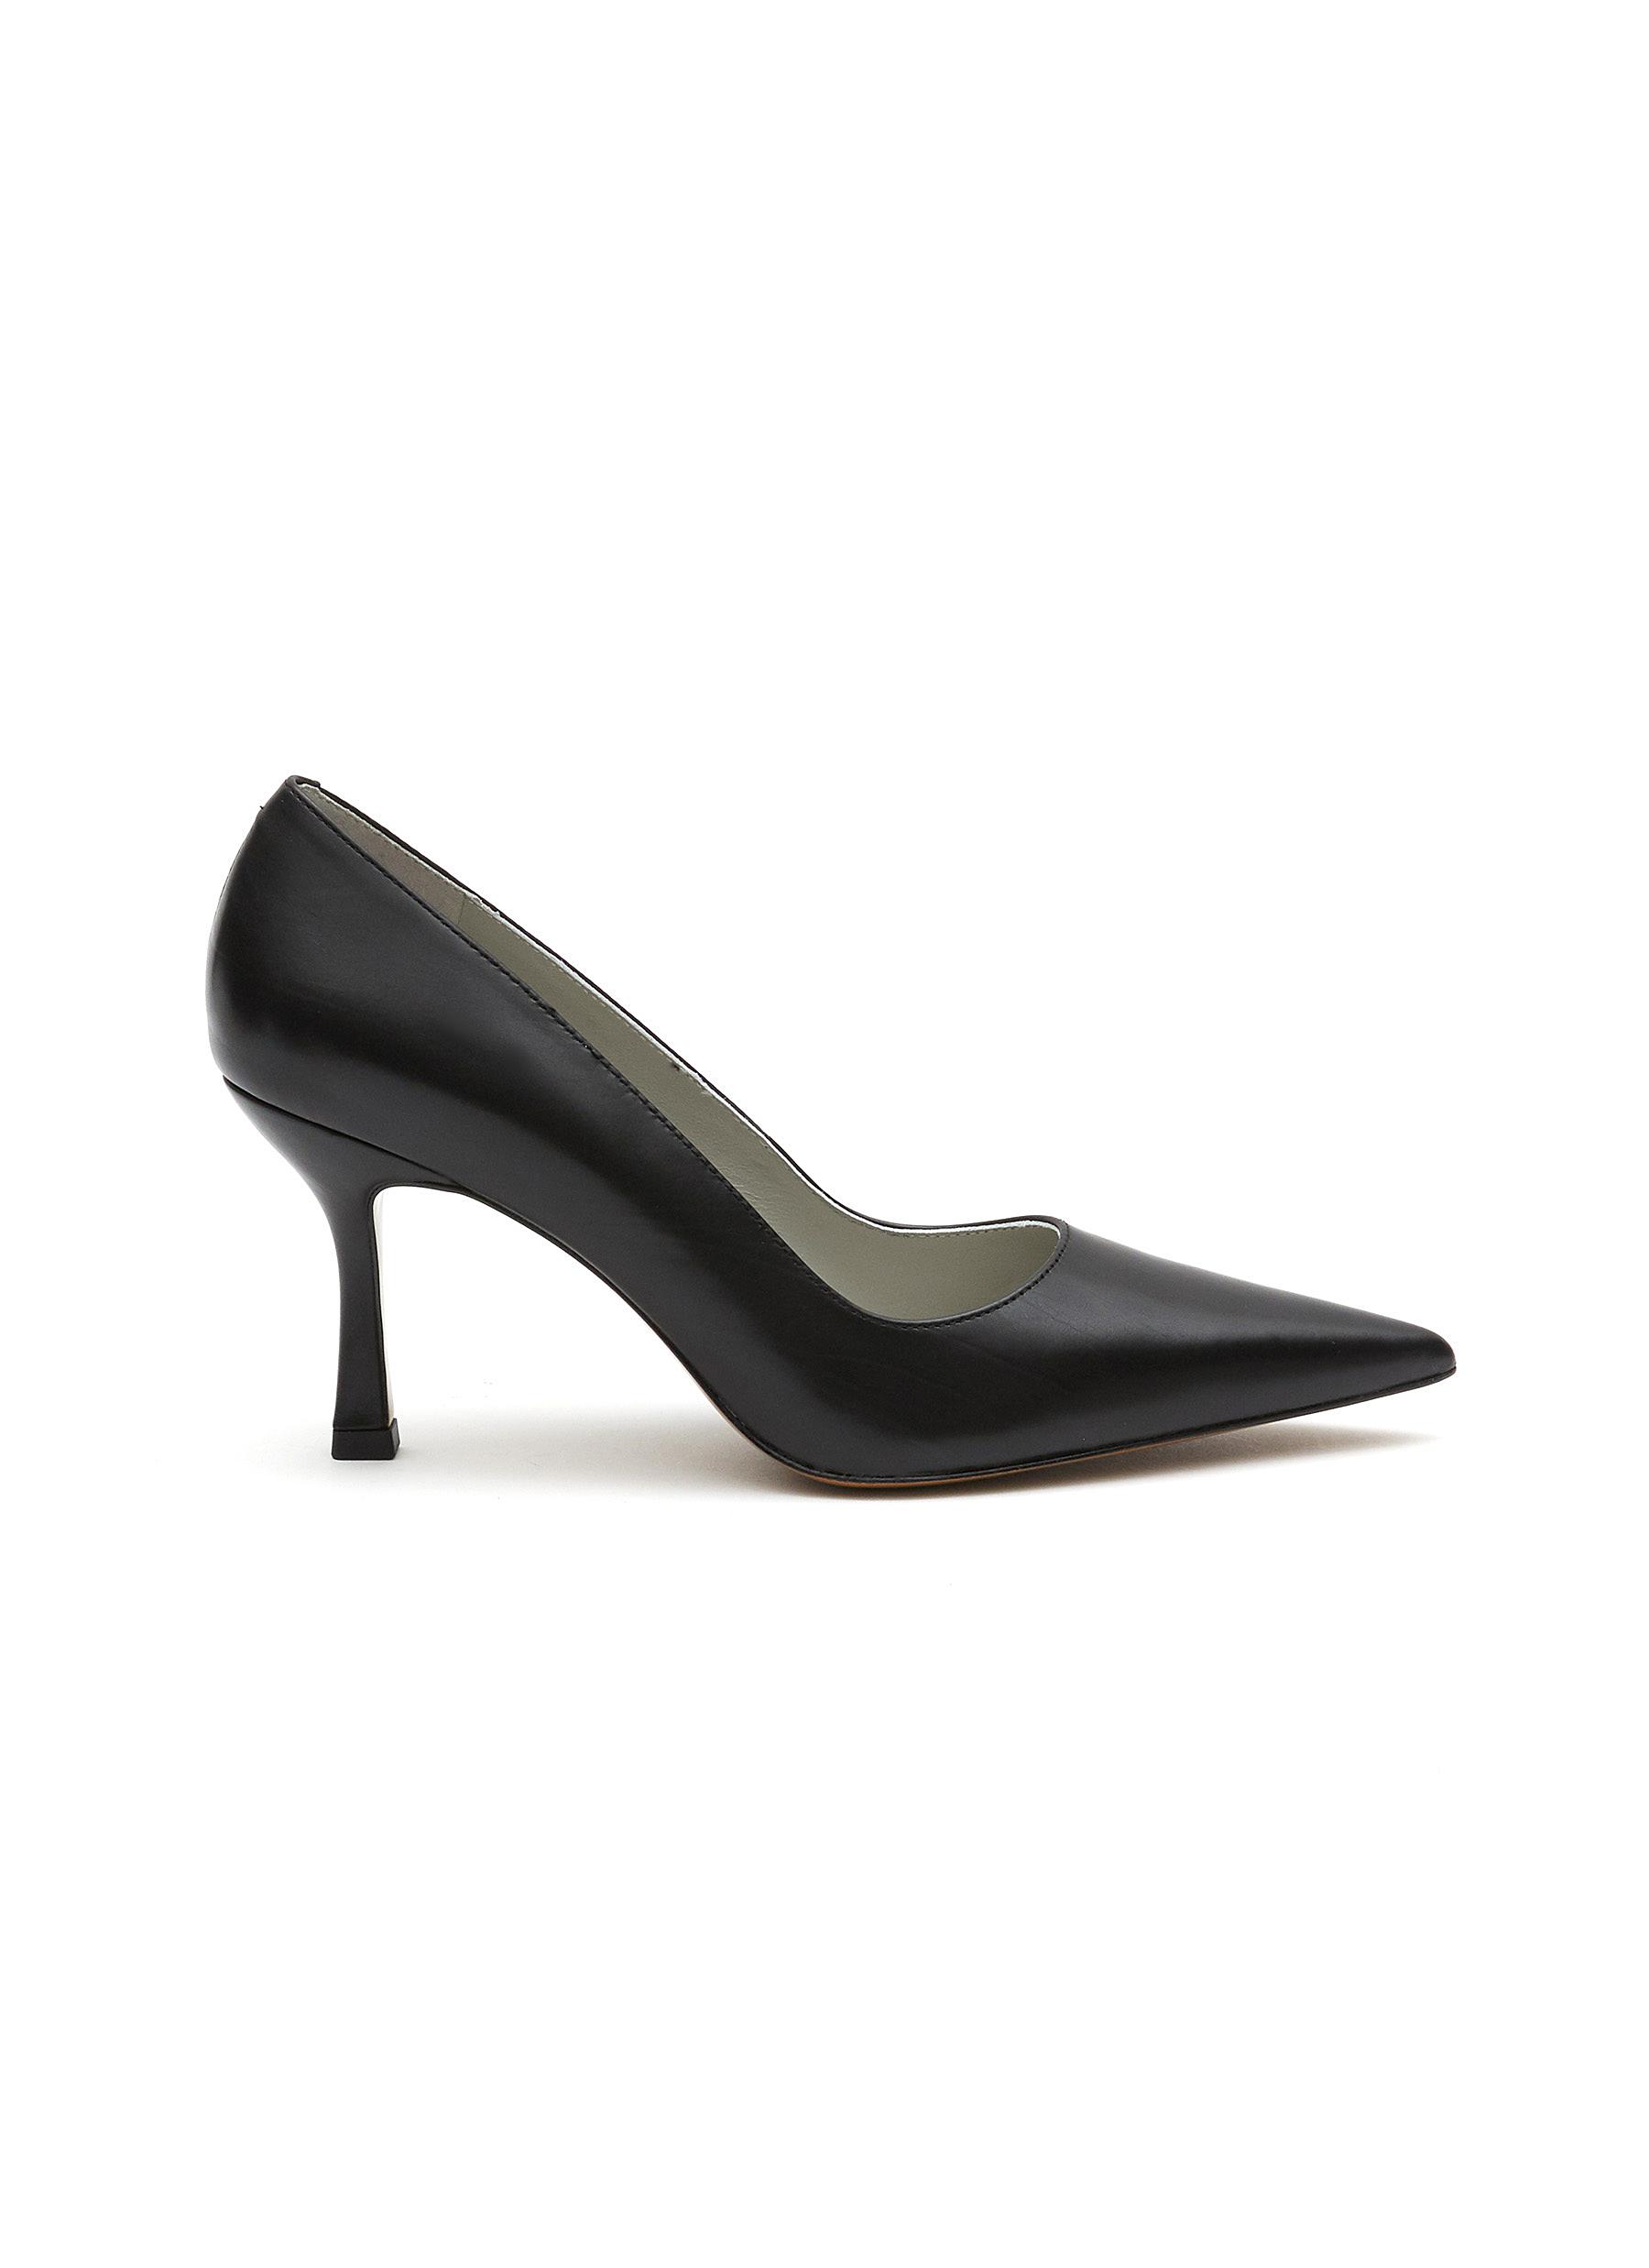 EQUIL ‘MILANO' POINT TOE LEATHER PUMPS